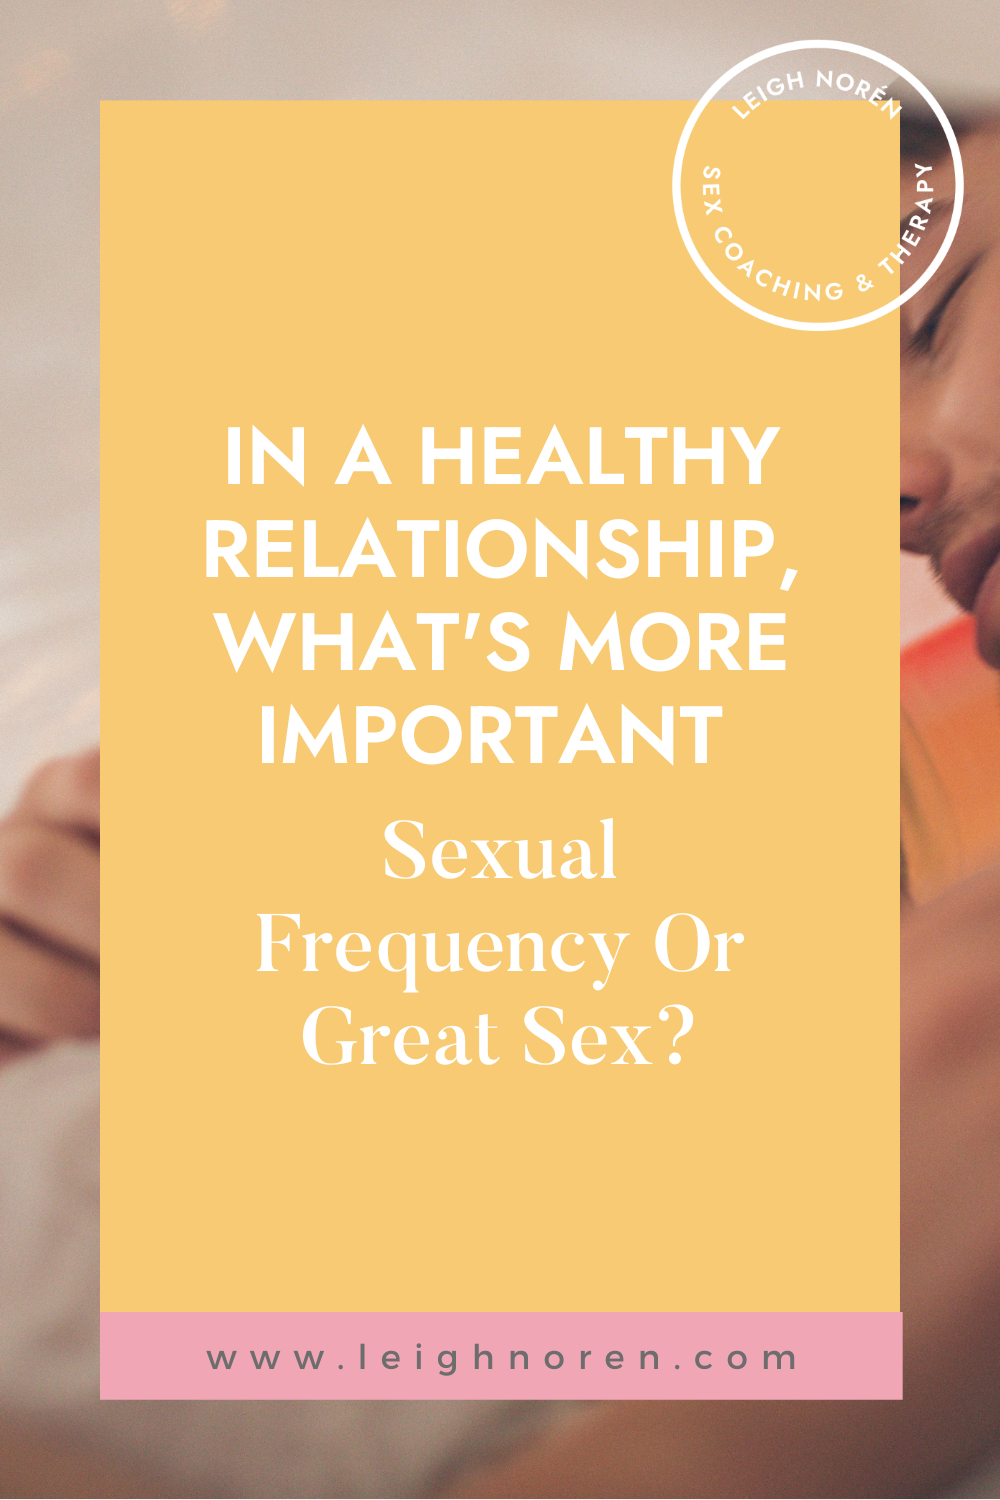 In A Healthy Relationship, What's More Important Sexual Frequency Or Great Sex?